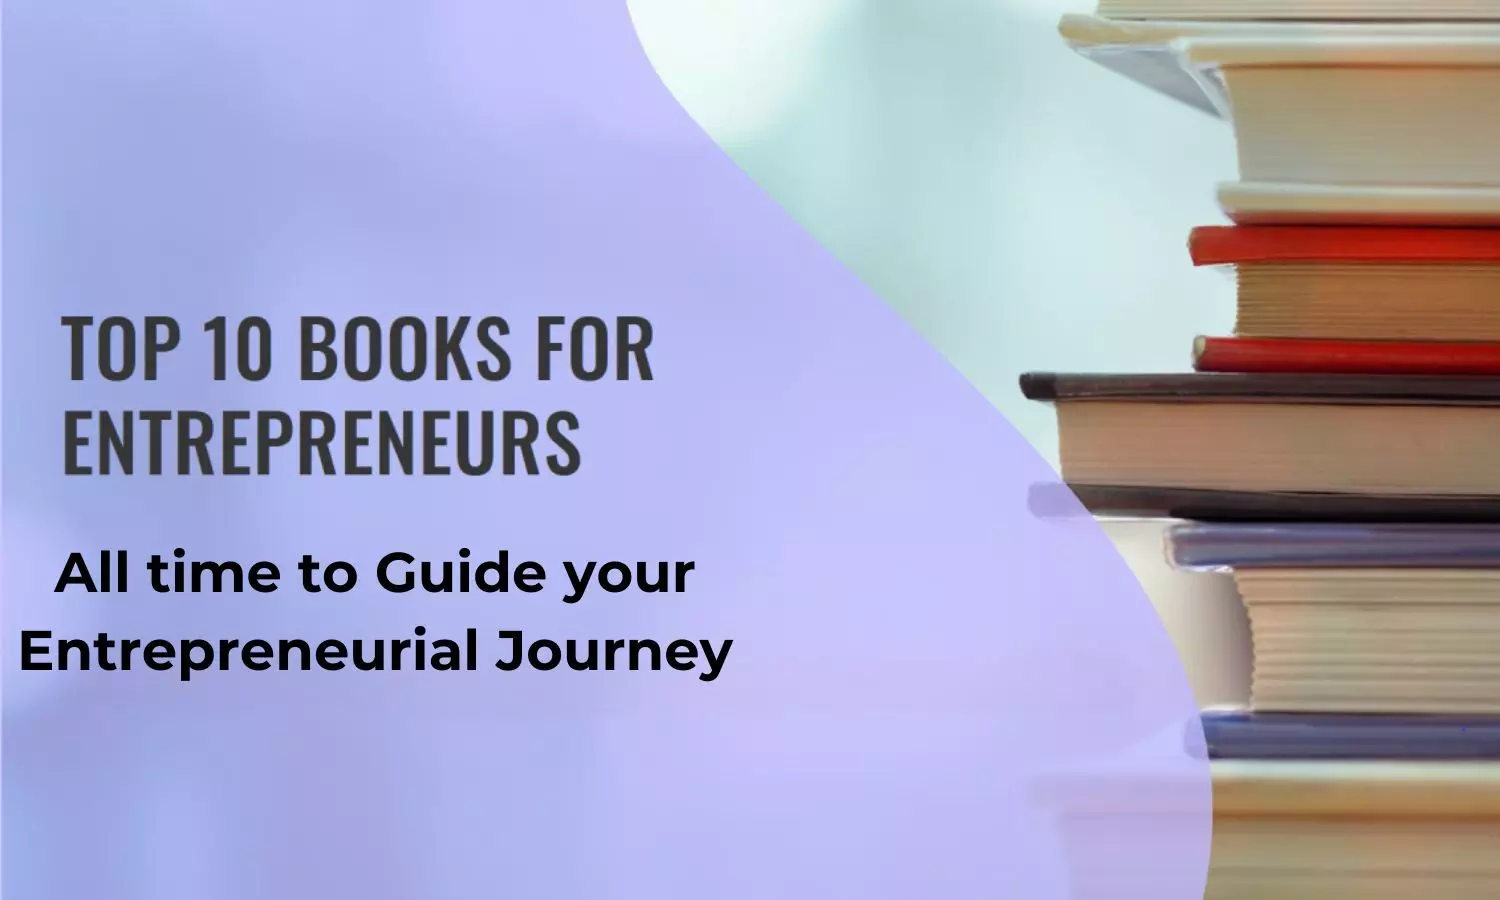 10 best business books of all time to guide your entrepreneurial journey